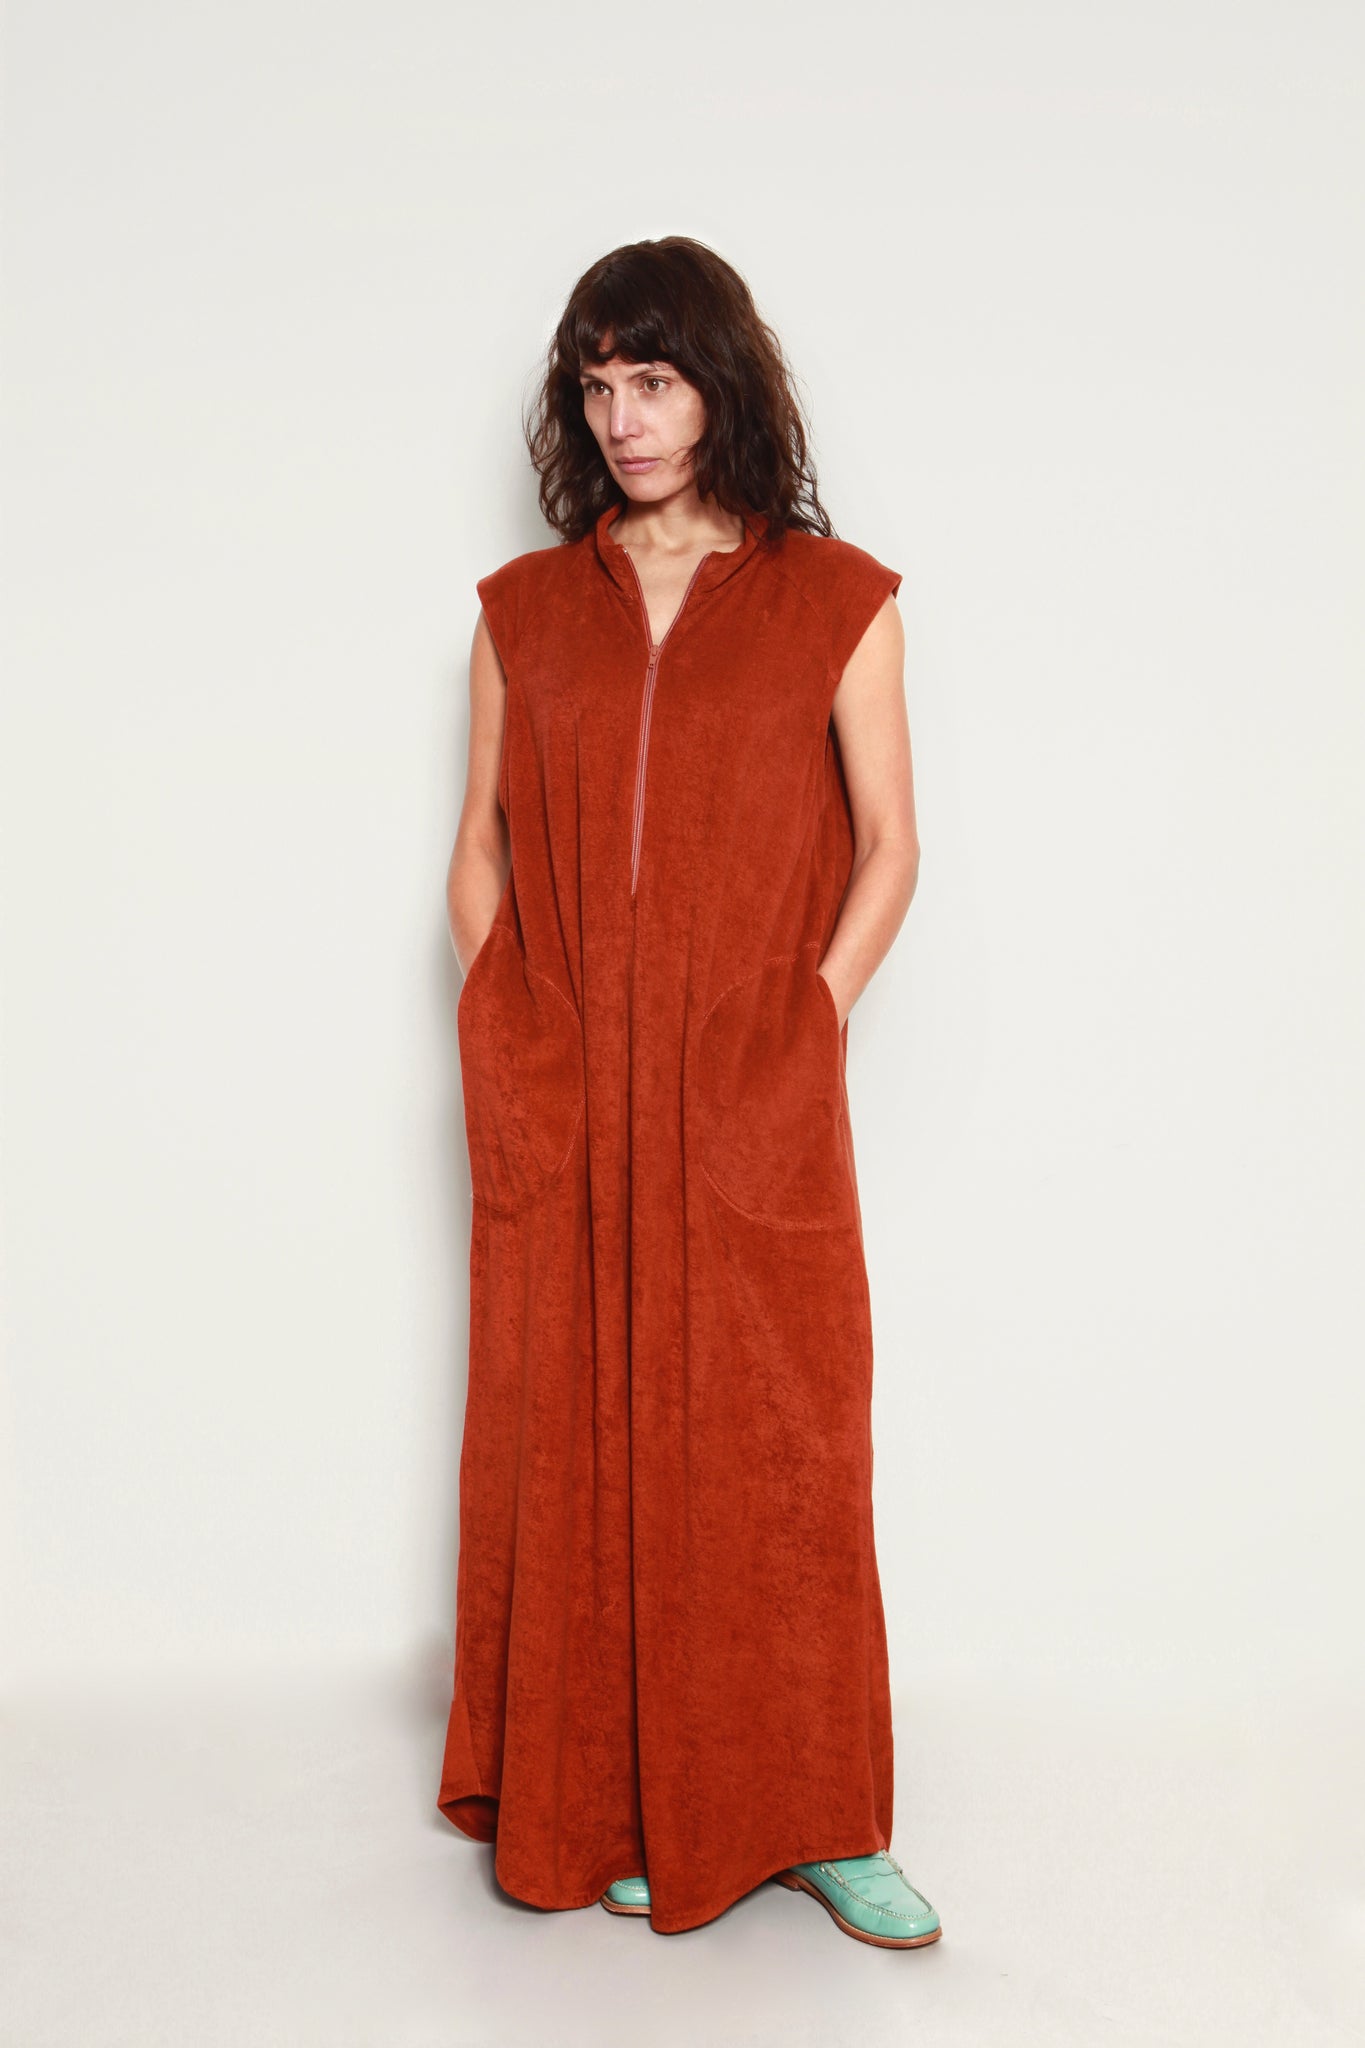 Kaftan Liberall. Style: Donnie - unisex, no sleeve, brown. Photo by Eva Roefs.